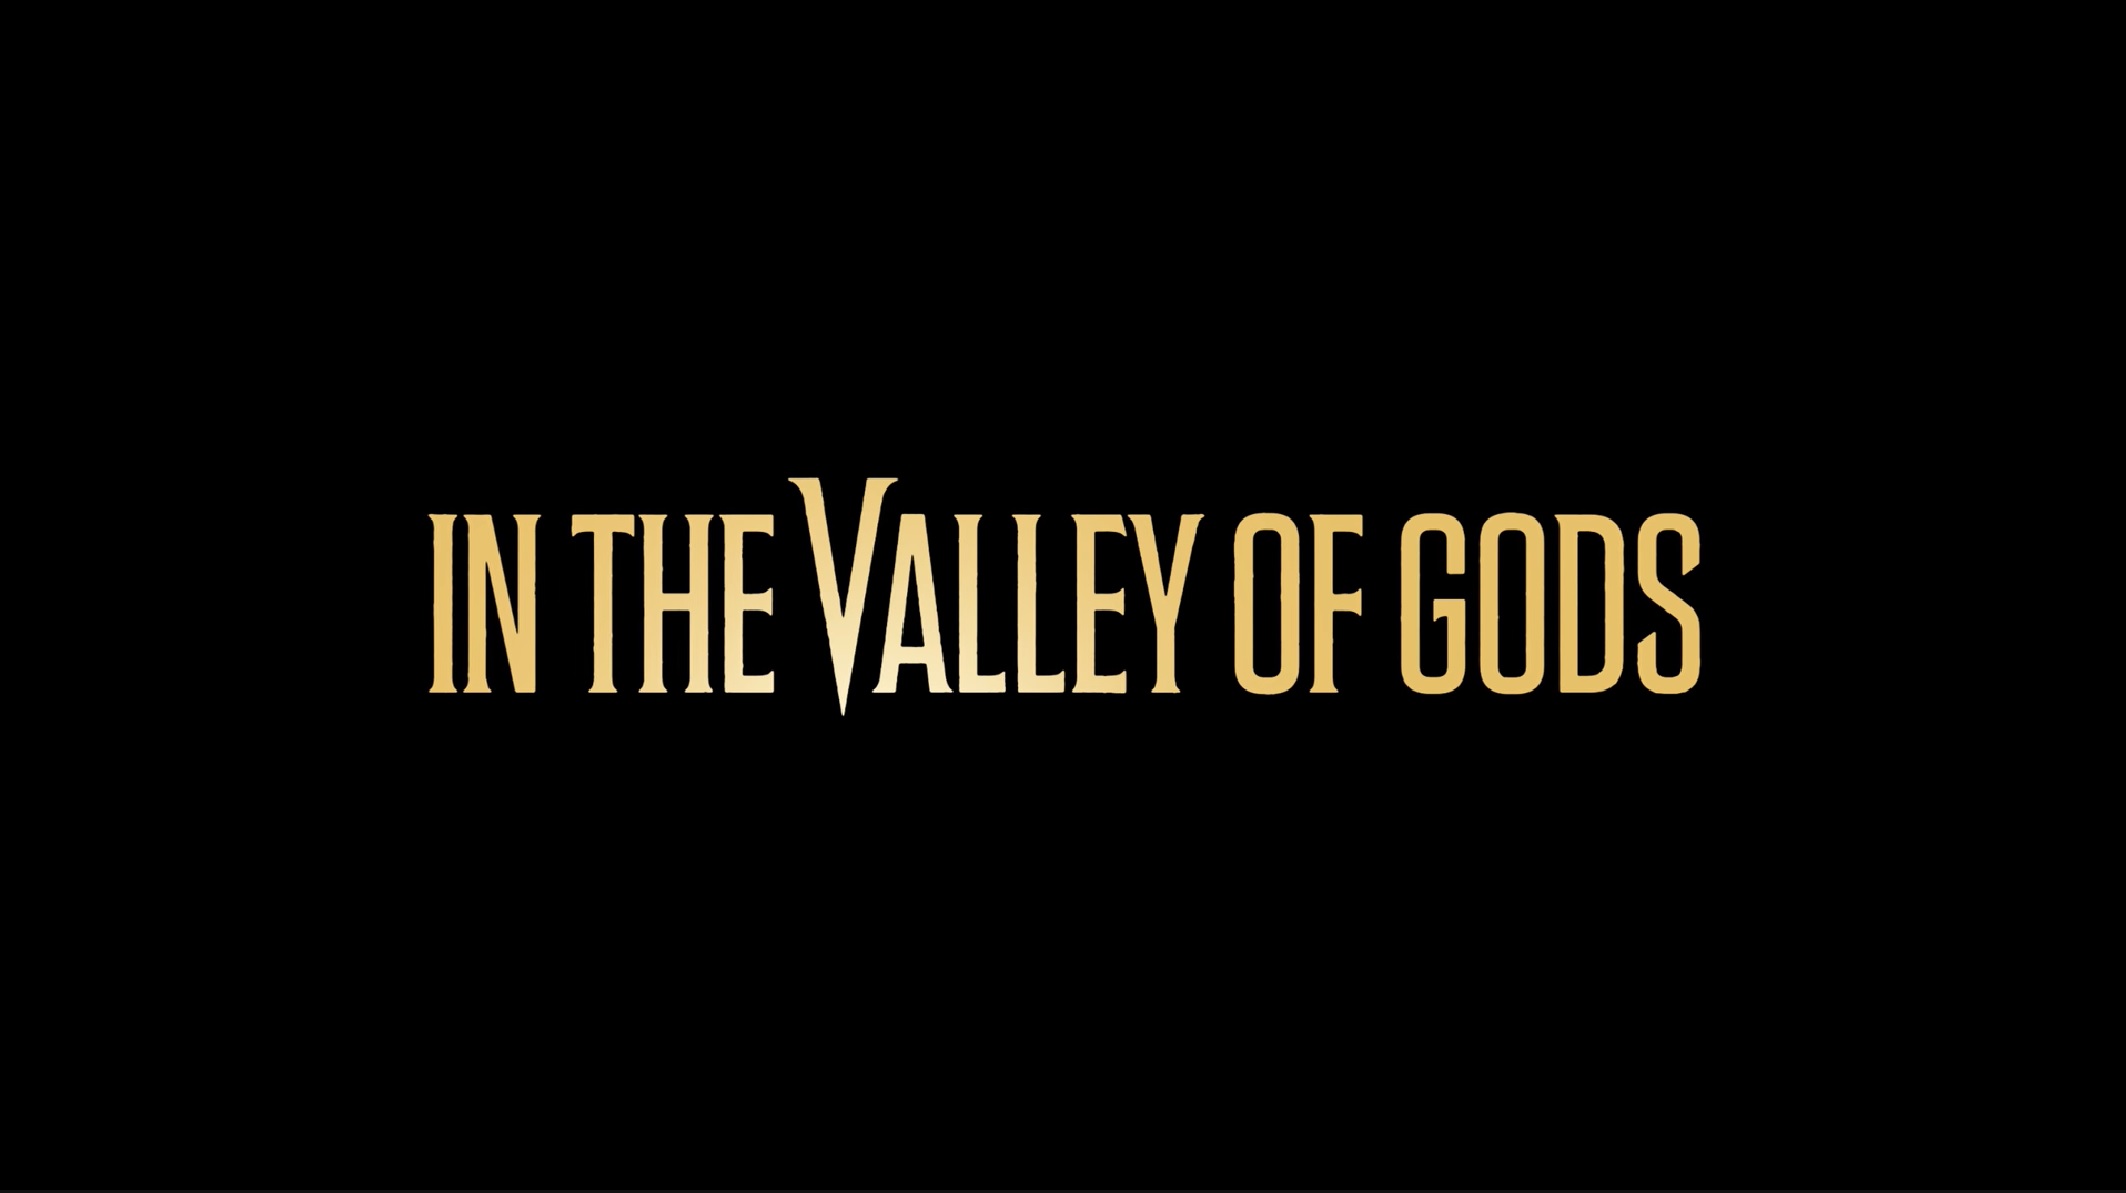 TGA 2017: Annunciato In The Valley of Gods